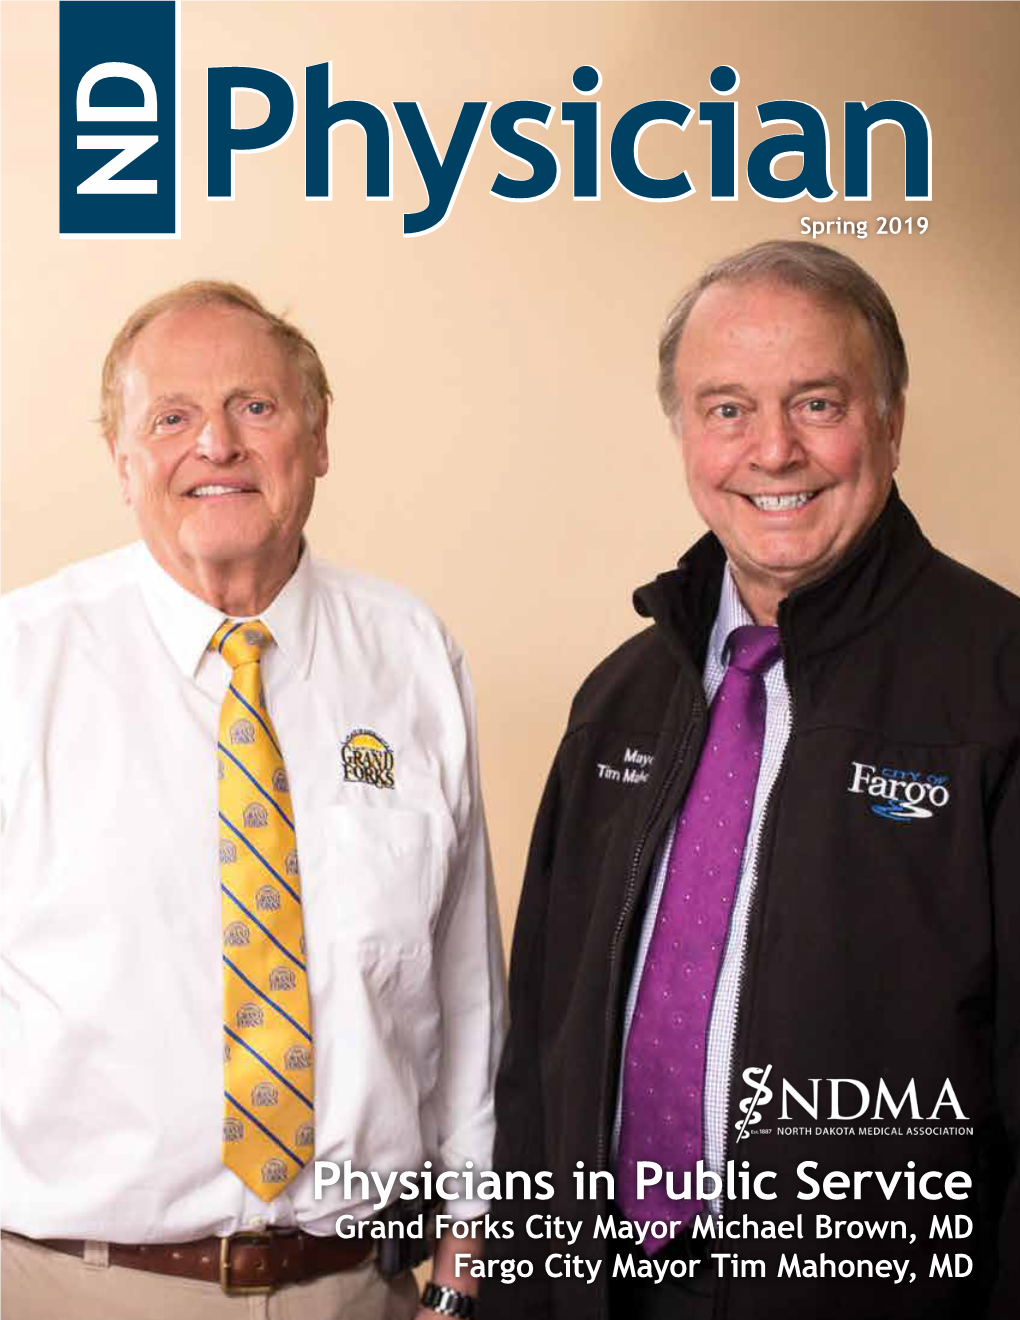 Physicians in Public Service Grand Forks City Mayor Michael Brown, MD Fargo City Mayor Tim Mahoney, MD Spring 2019 in This Issue